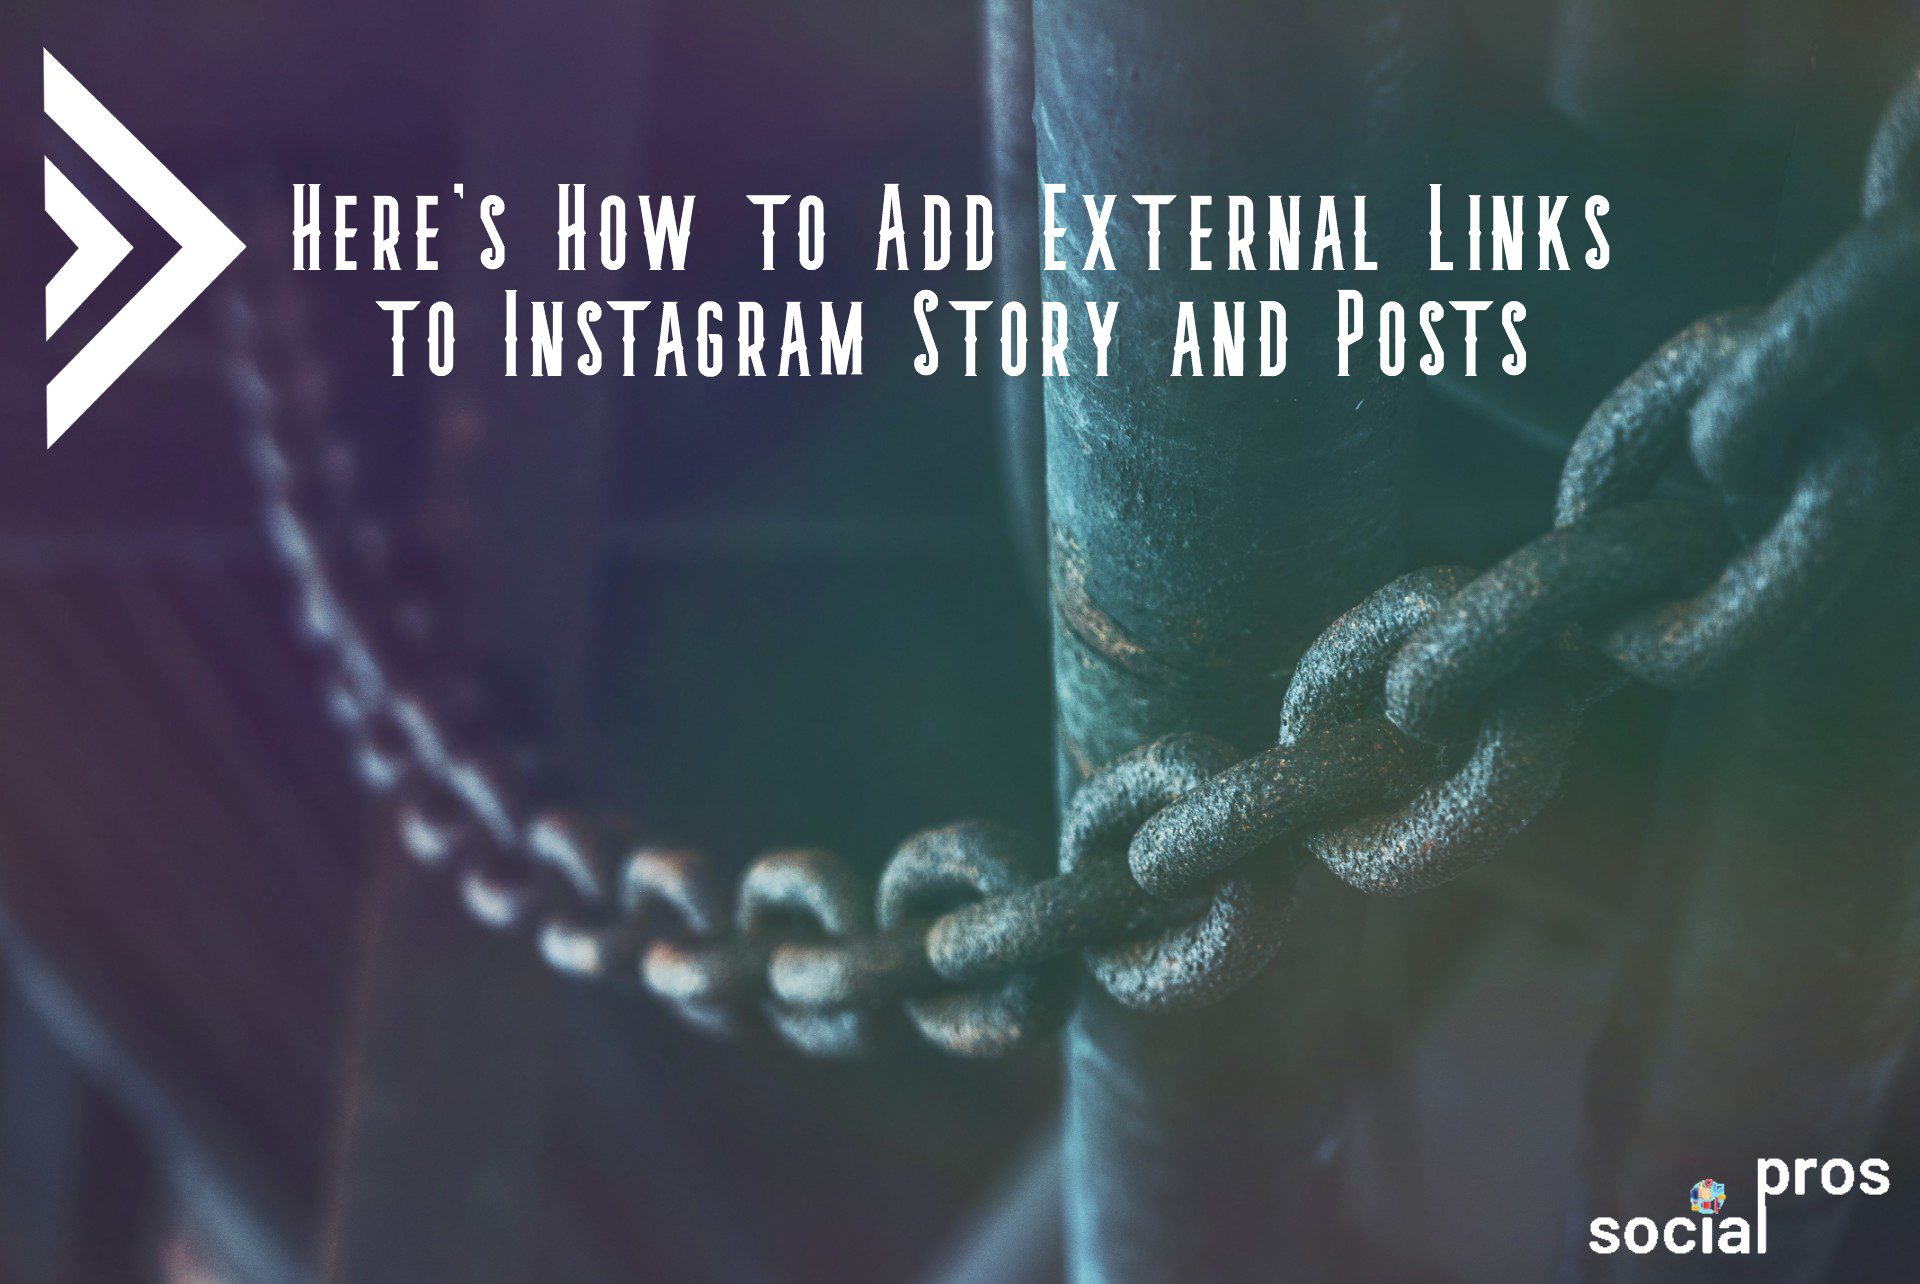 Add external link to Instagram story and posts